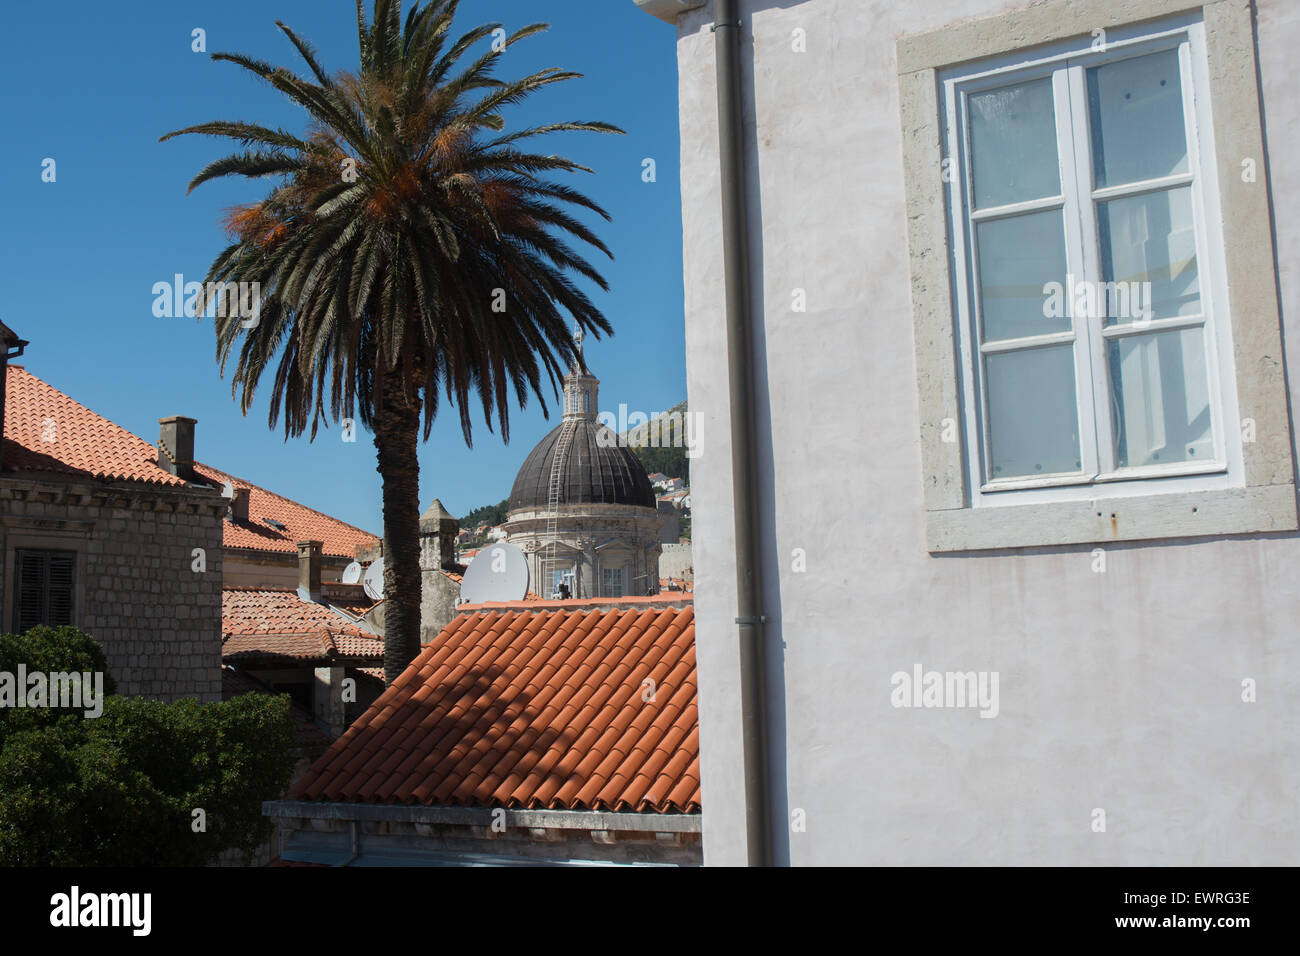 buildings, rooftops & palm tree with cathedral-treasury tower in old city of dubrovnik, croatia Stock Photo